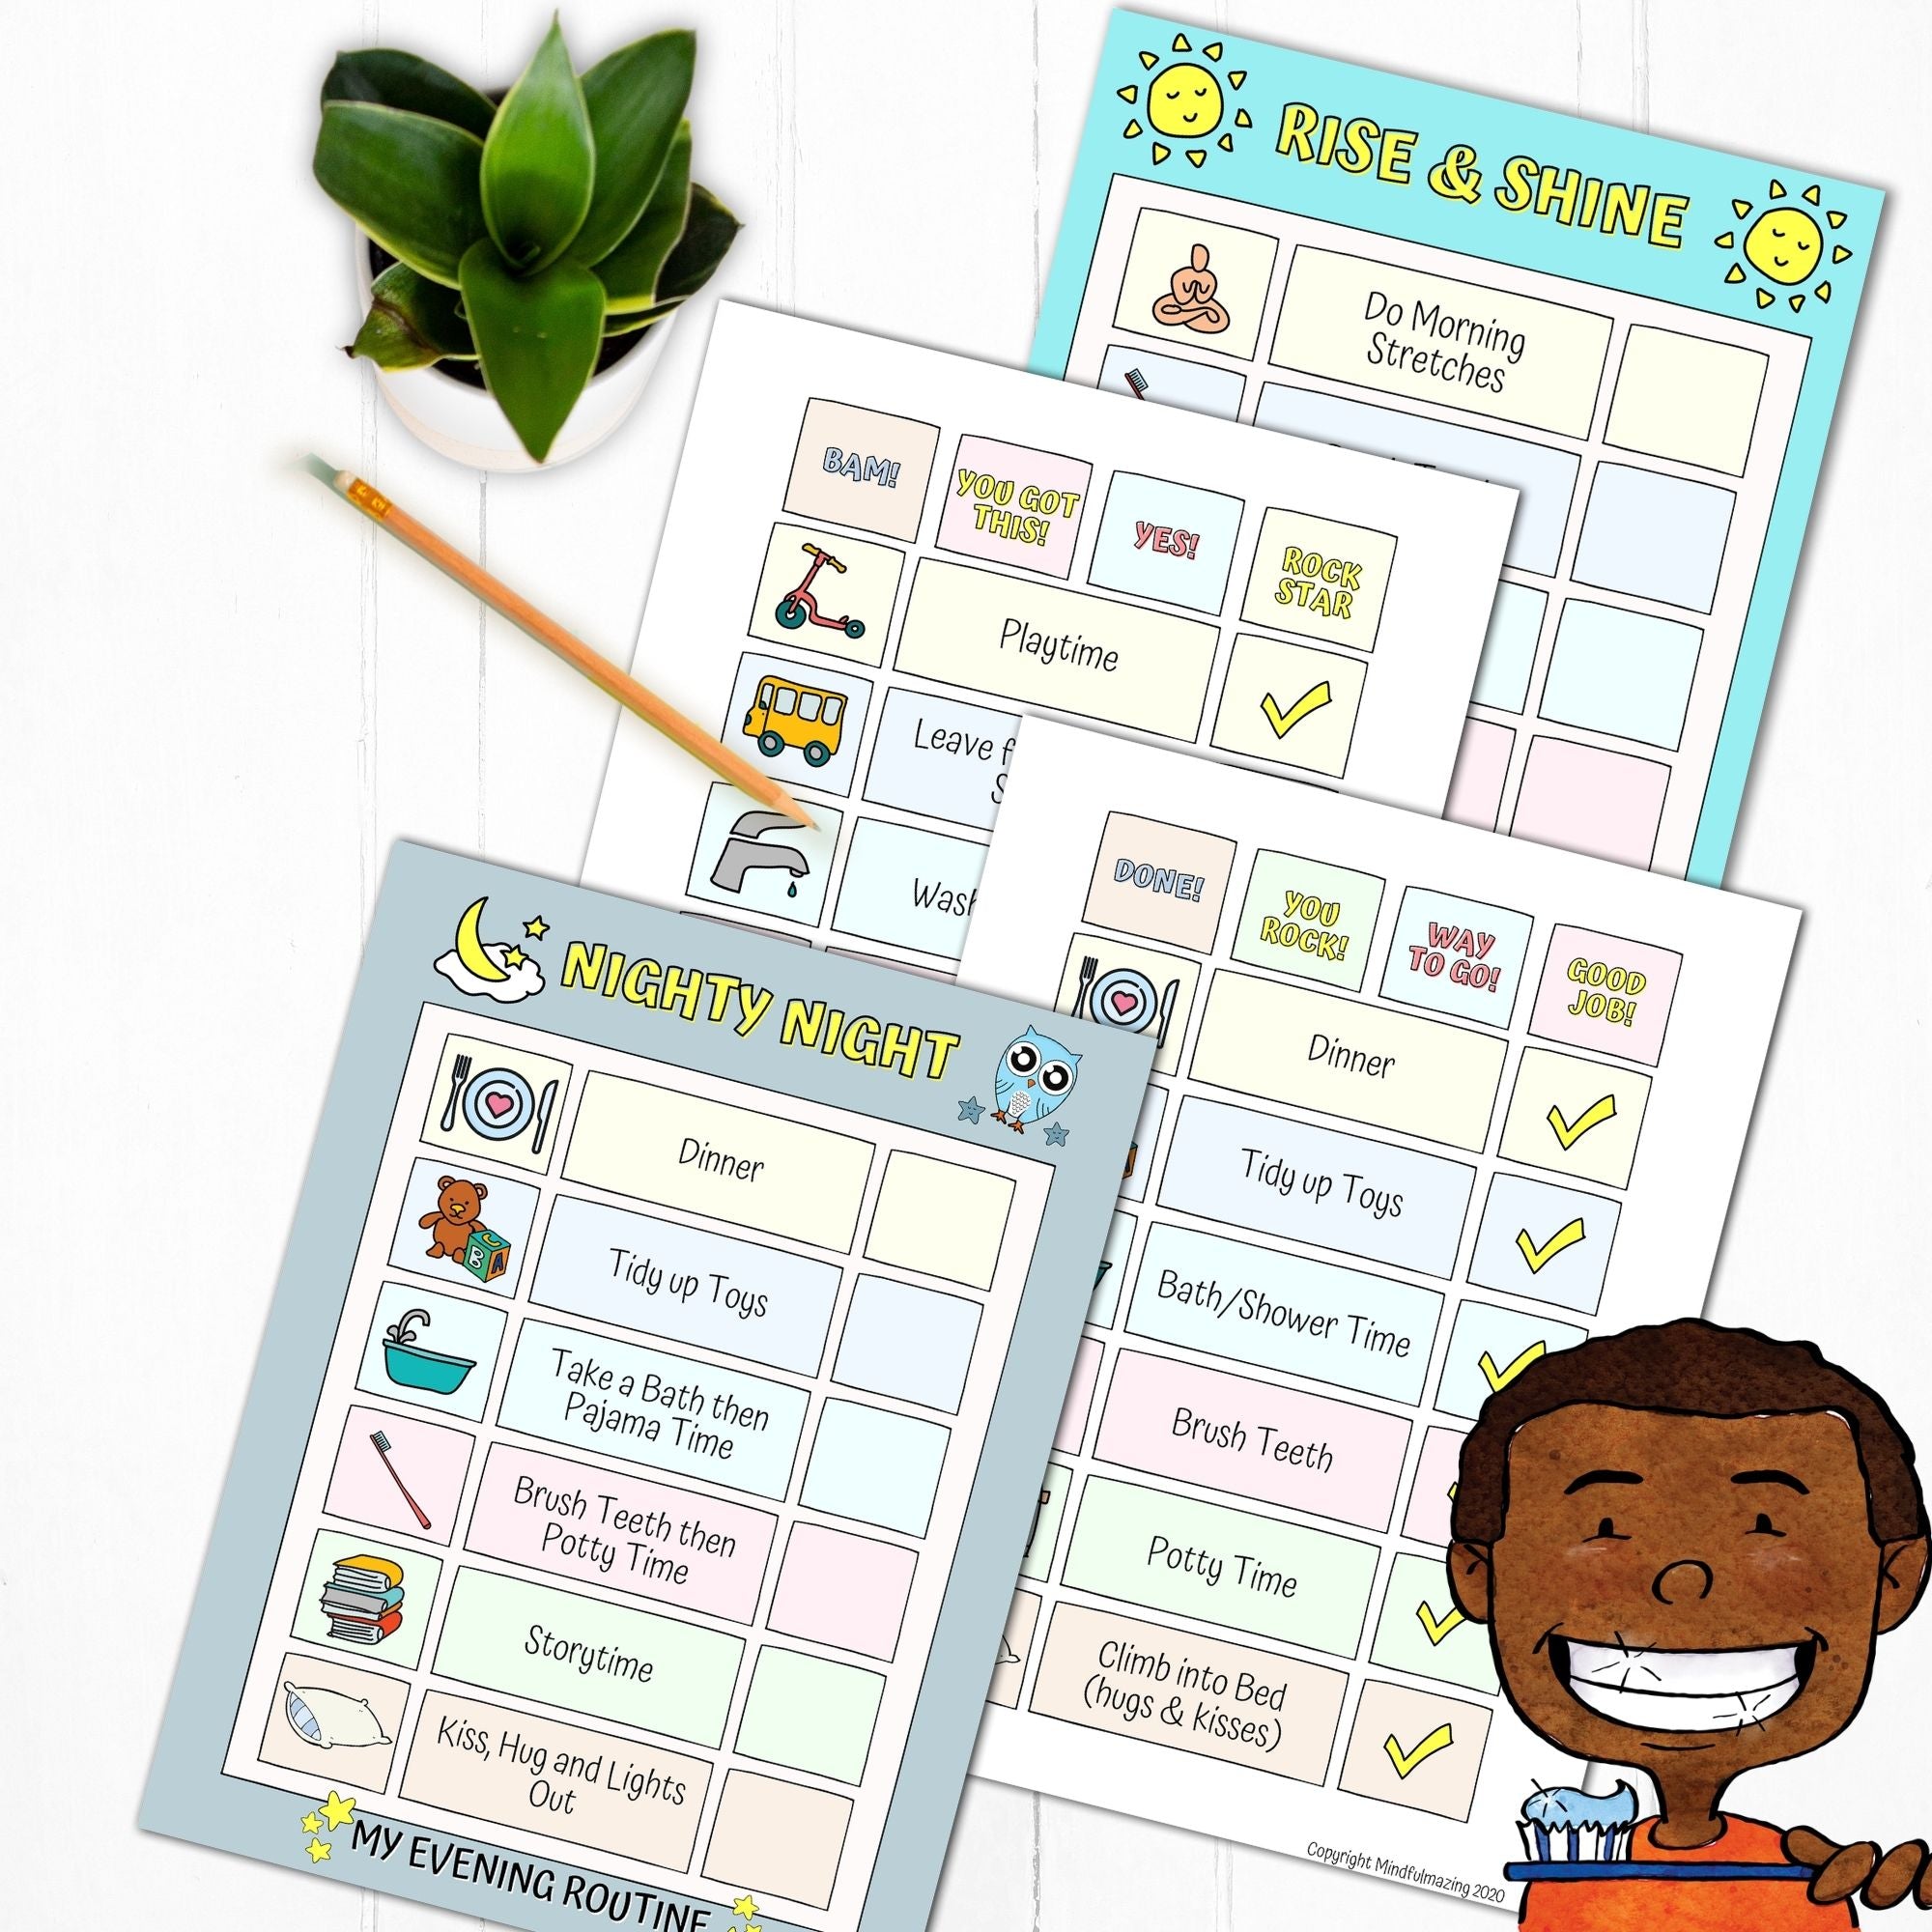 Routine Charts For Kids PDF (ages 2-10)